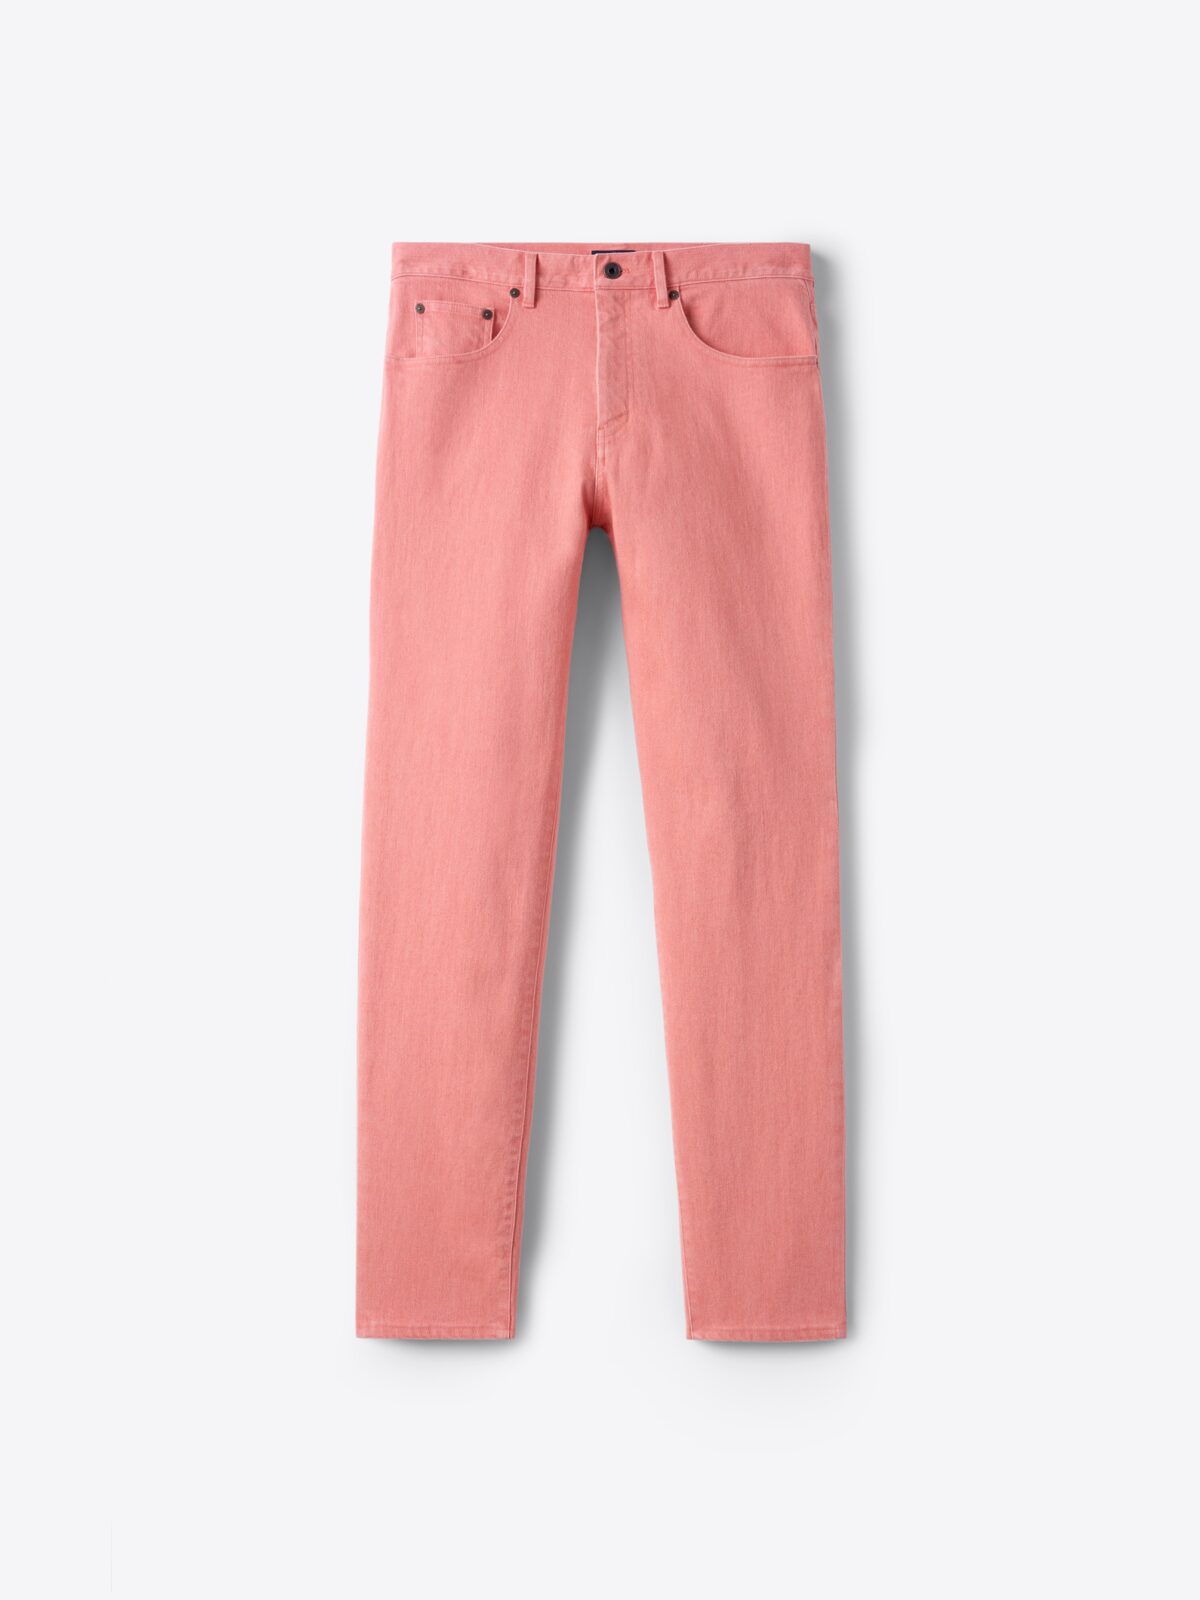 Slim Stretch Two-Tone Tailored Pant - Pink, Suit Pants